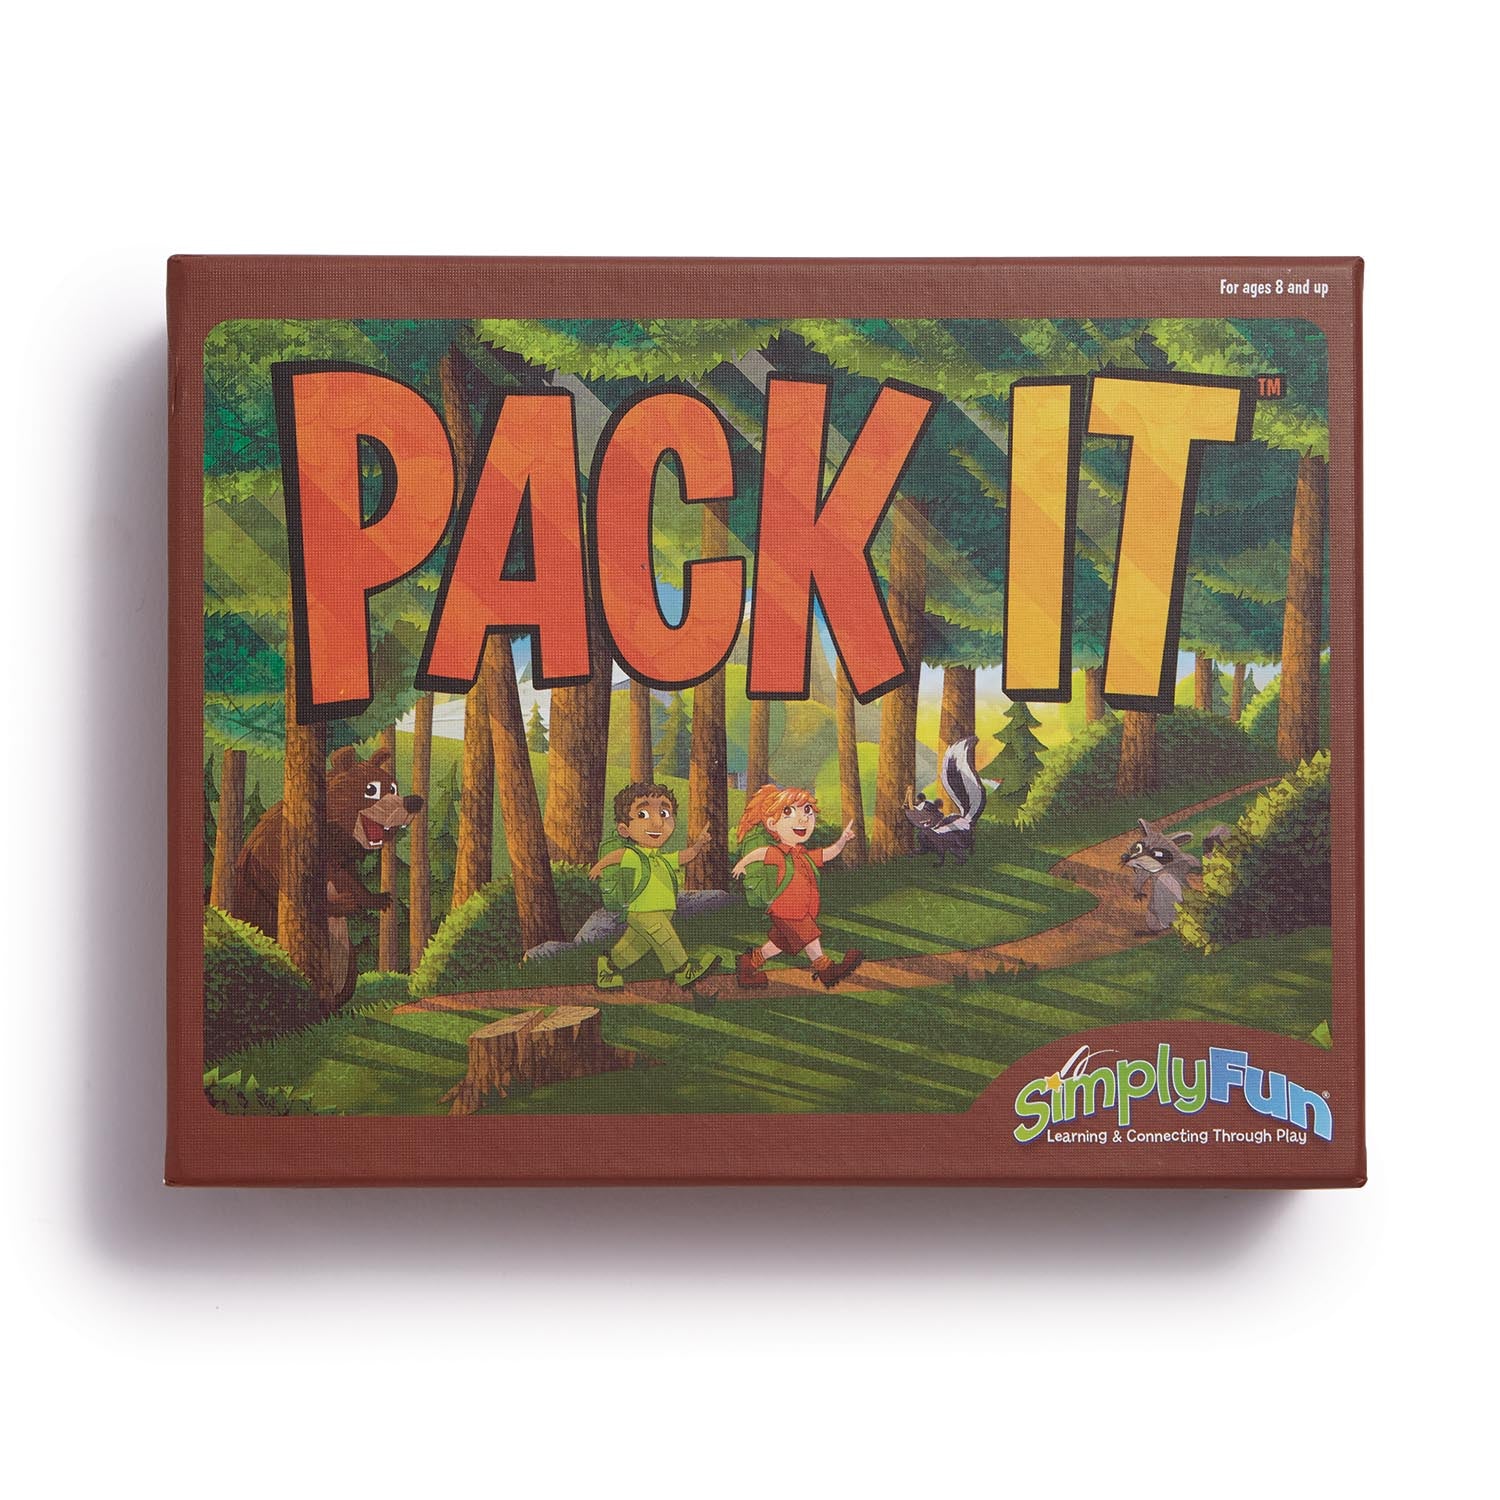 Pack It Strategy & Risk/Reward Card Game for Ages 8+